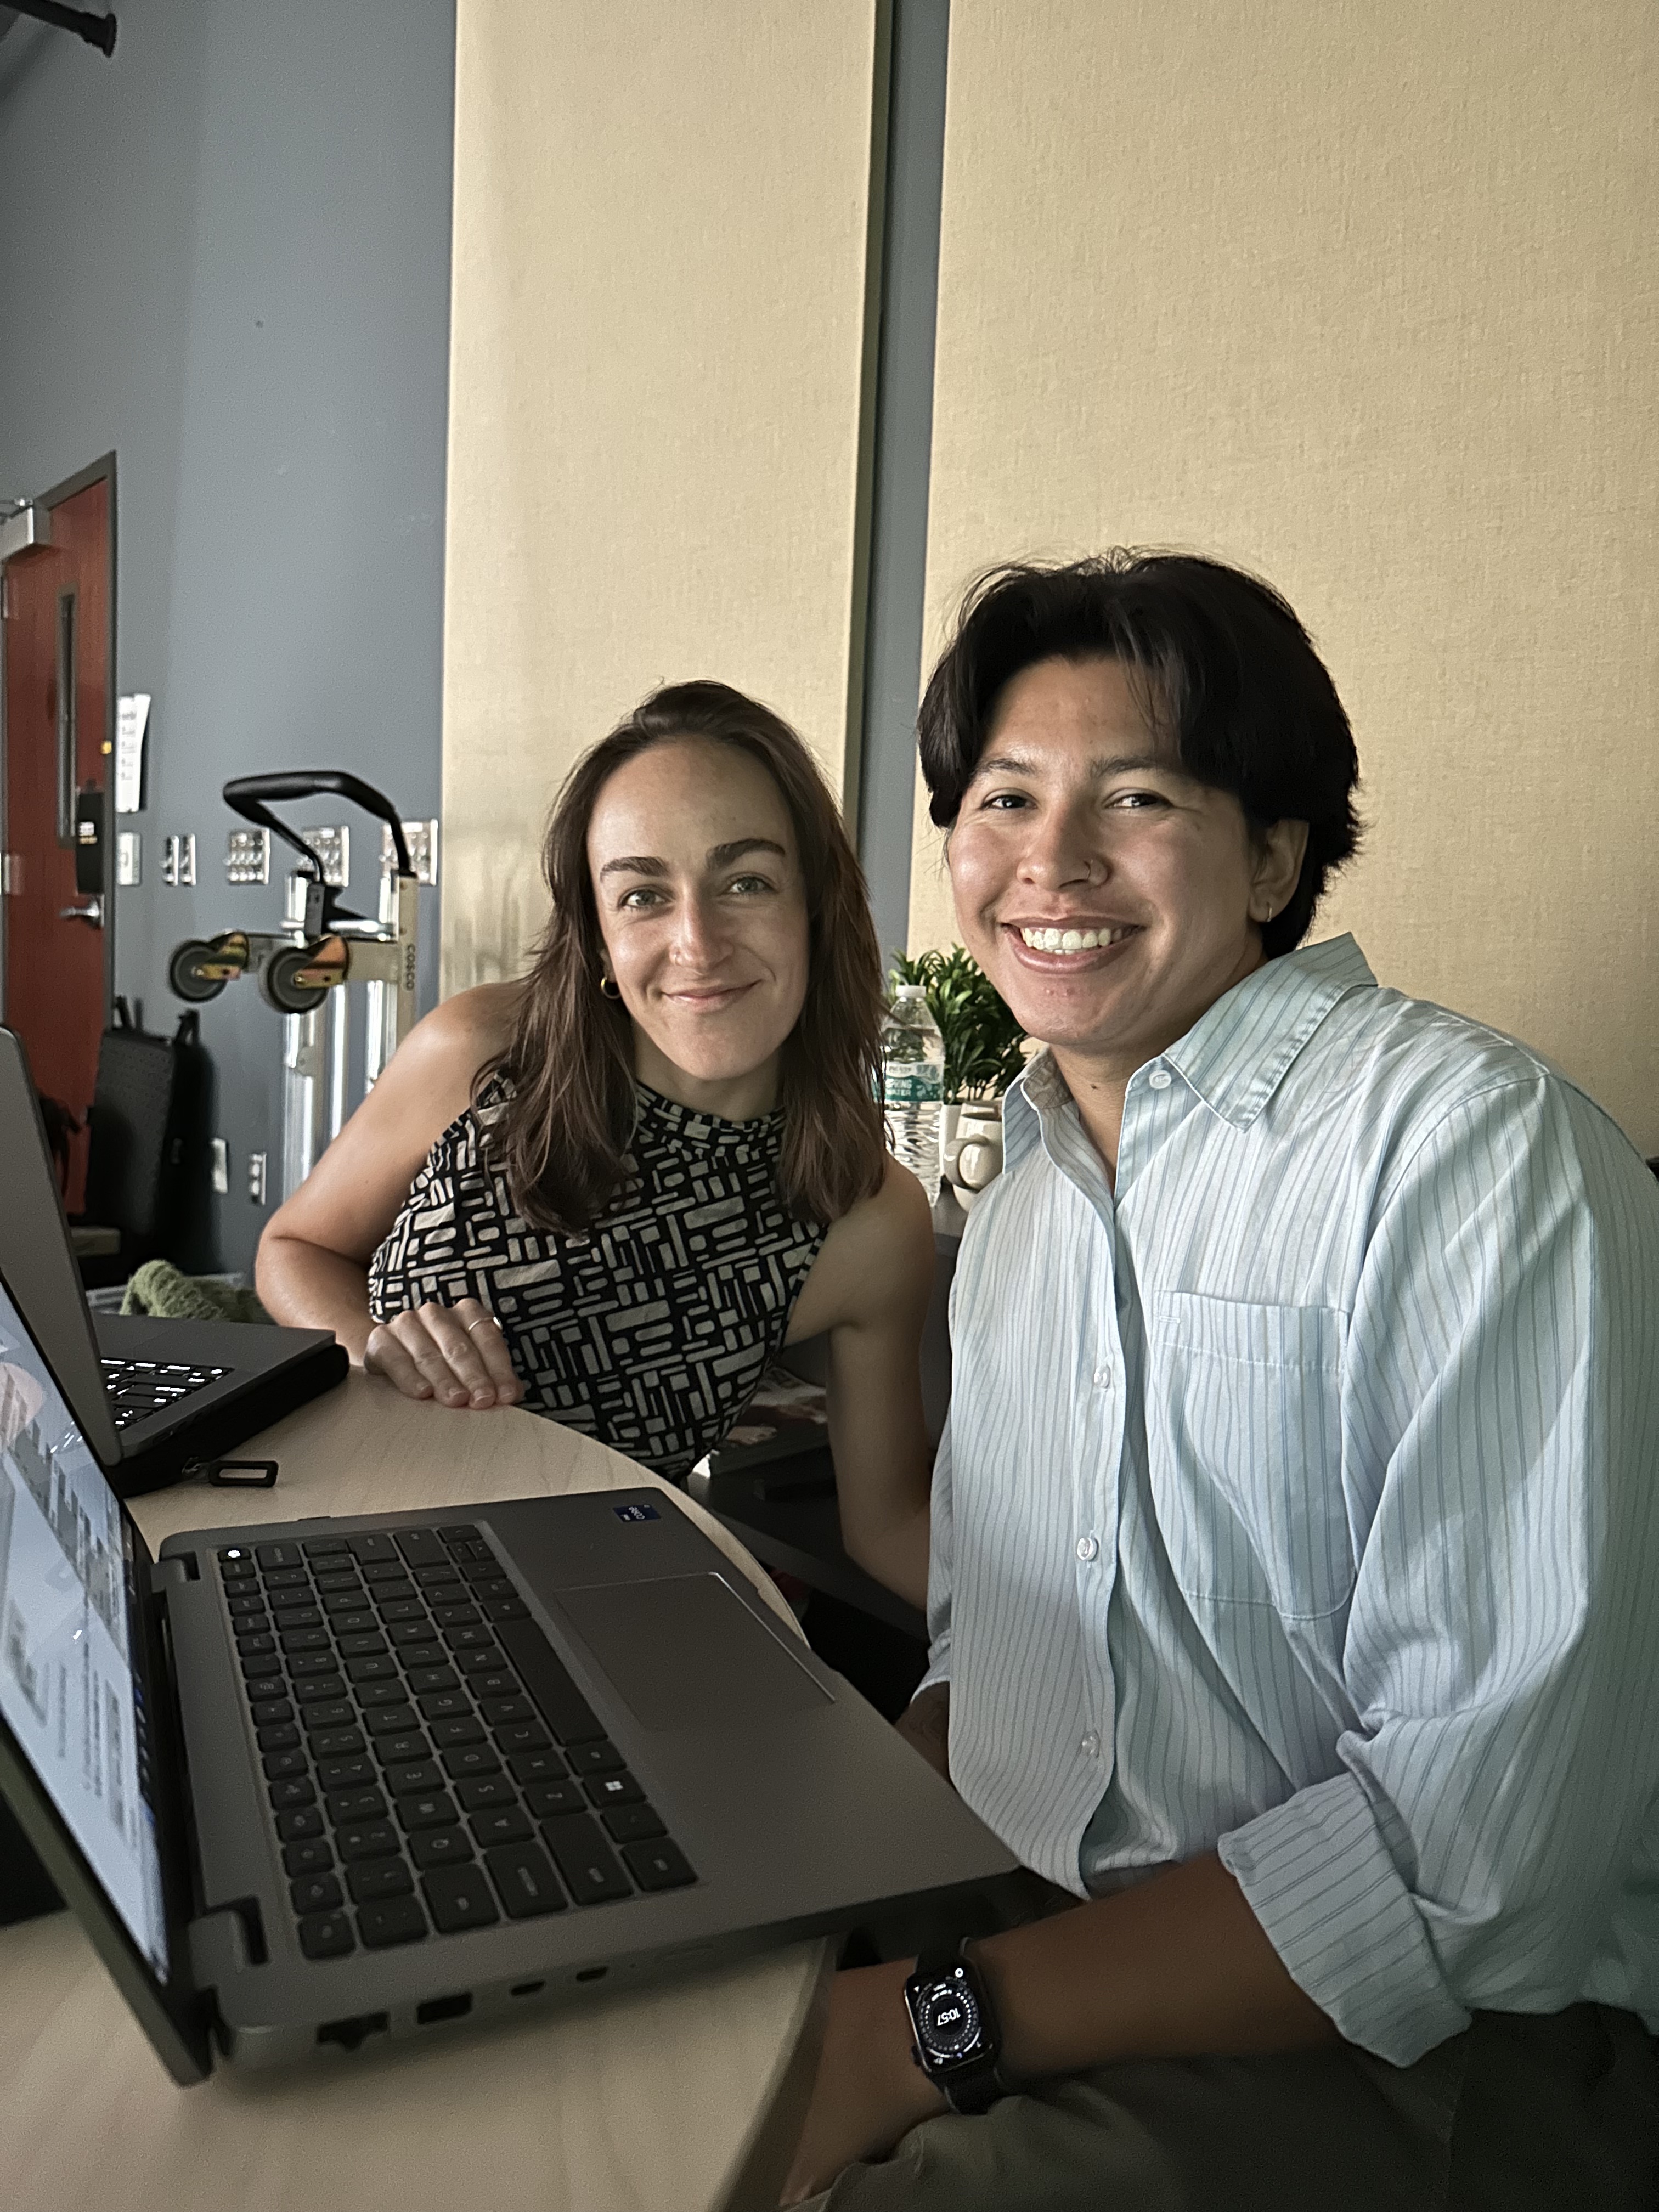 A woman and man sit, smiling, behind a computer.